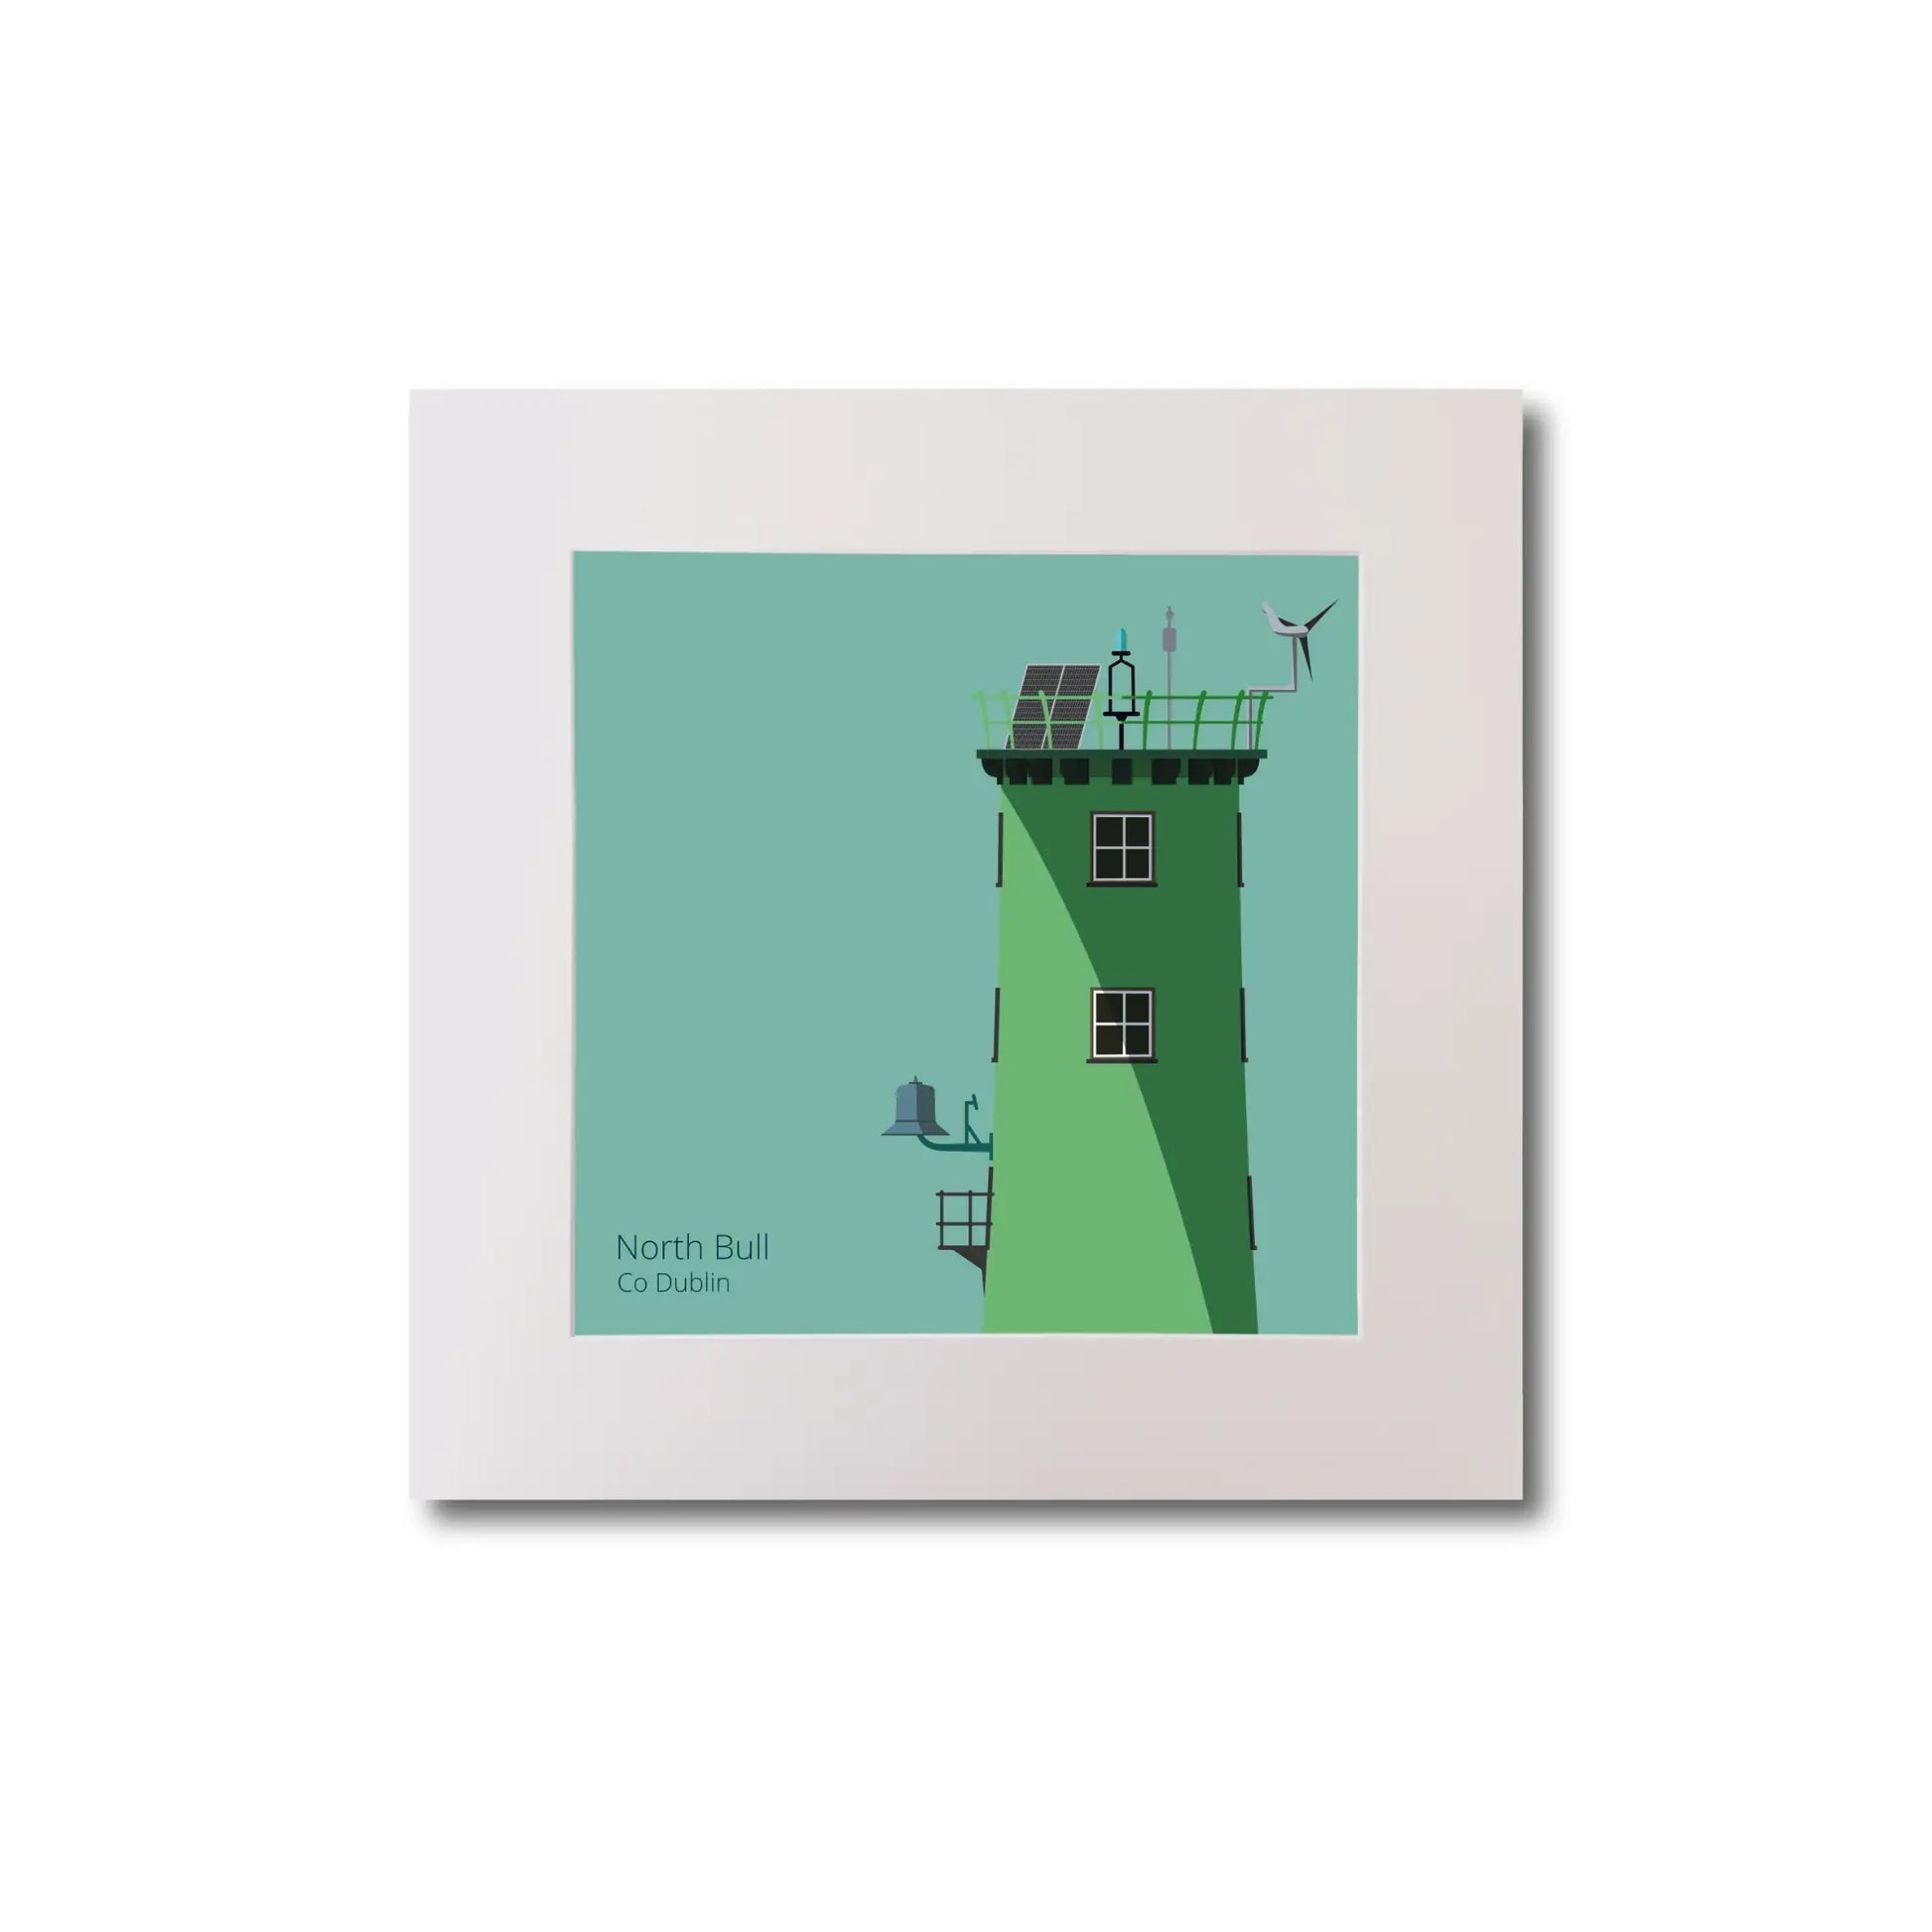 Illustration of North Bull lighthouse on an ocean green background, mounted and measuring 20x20cm.